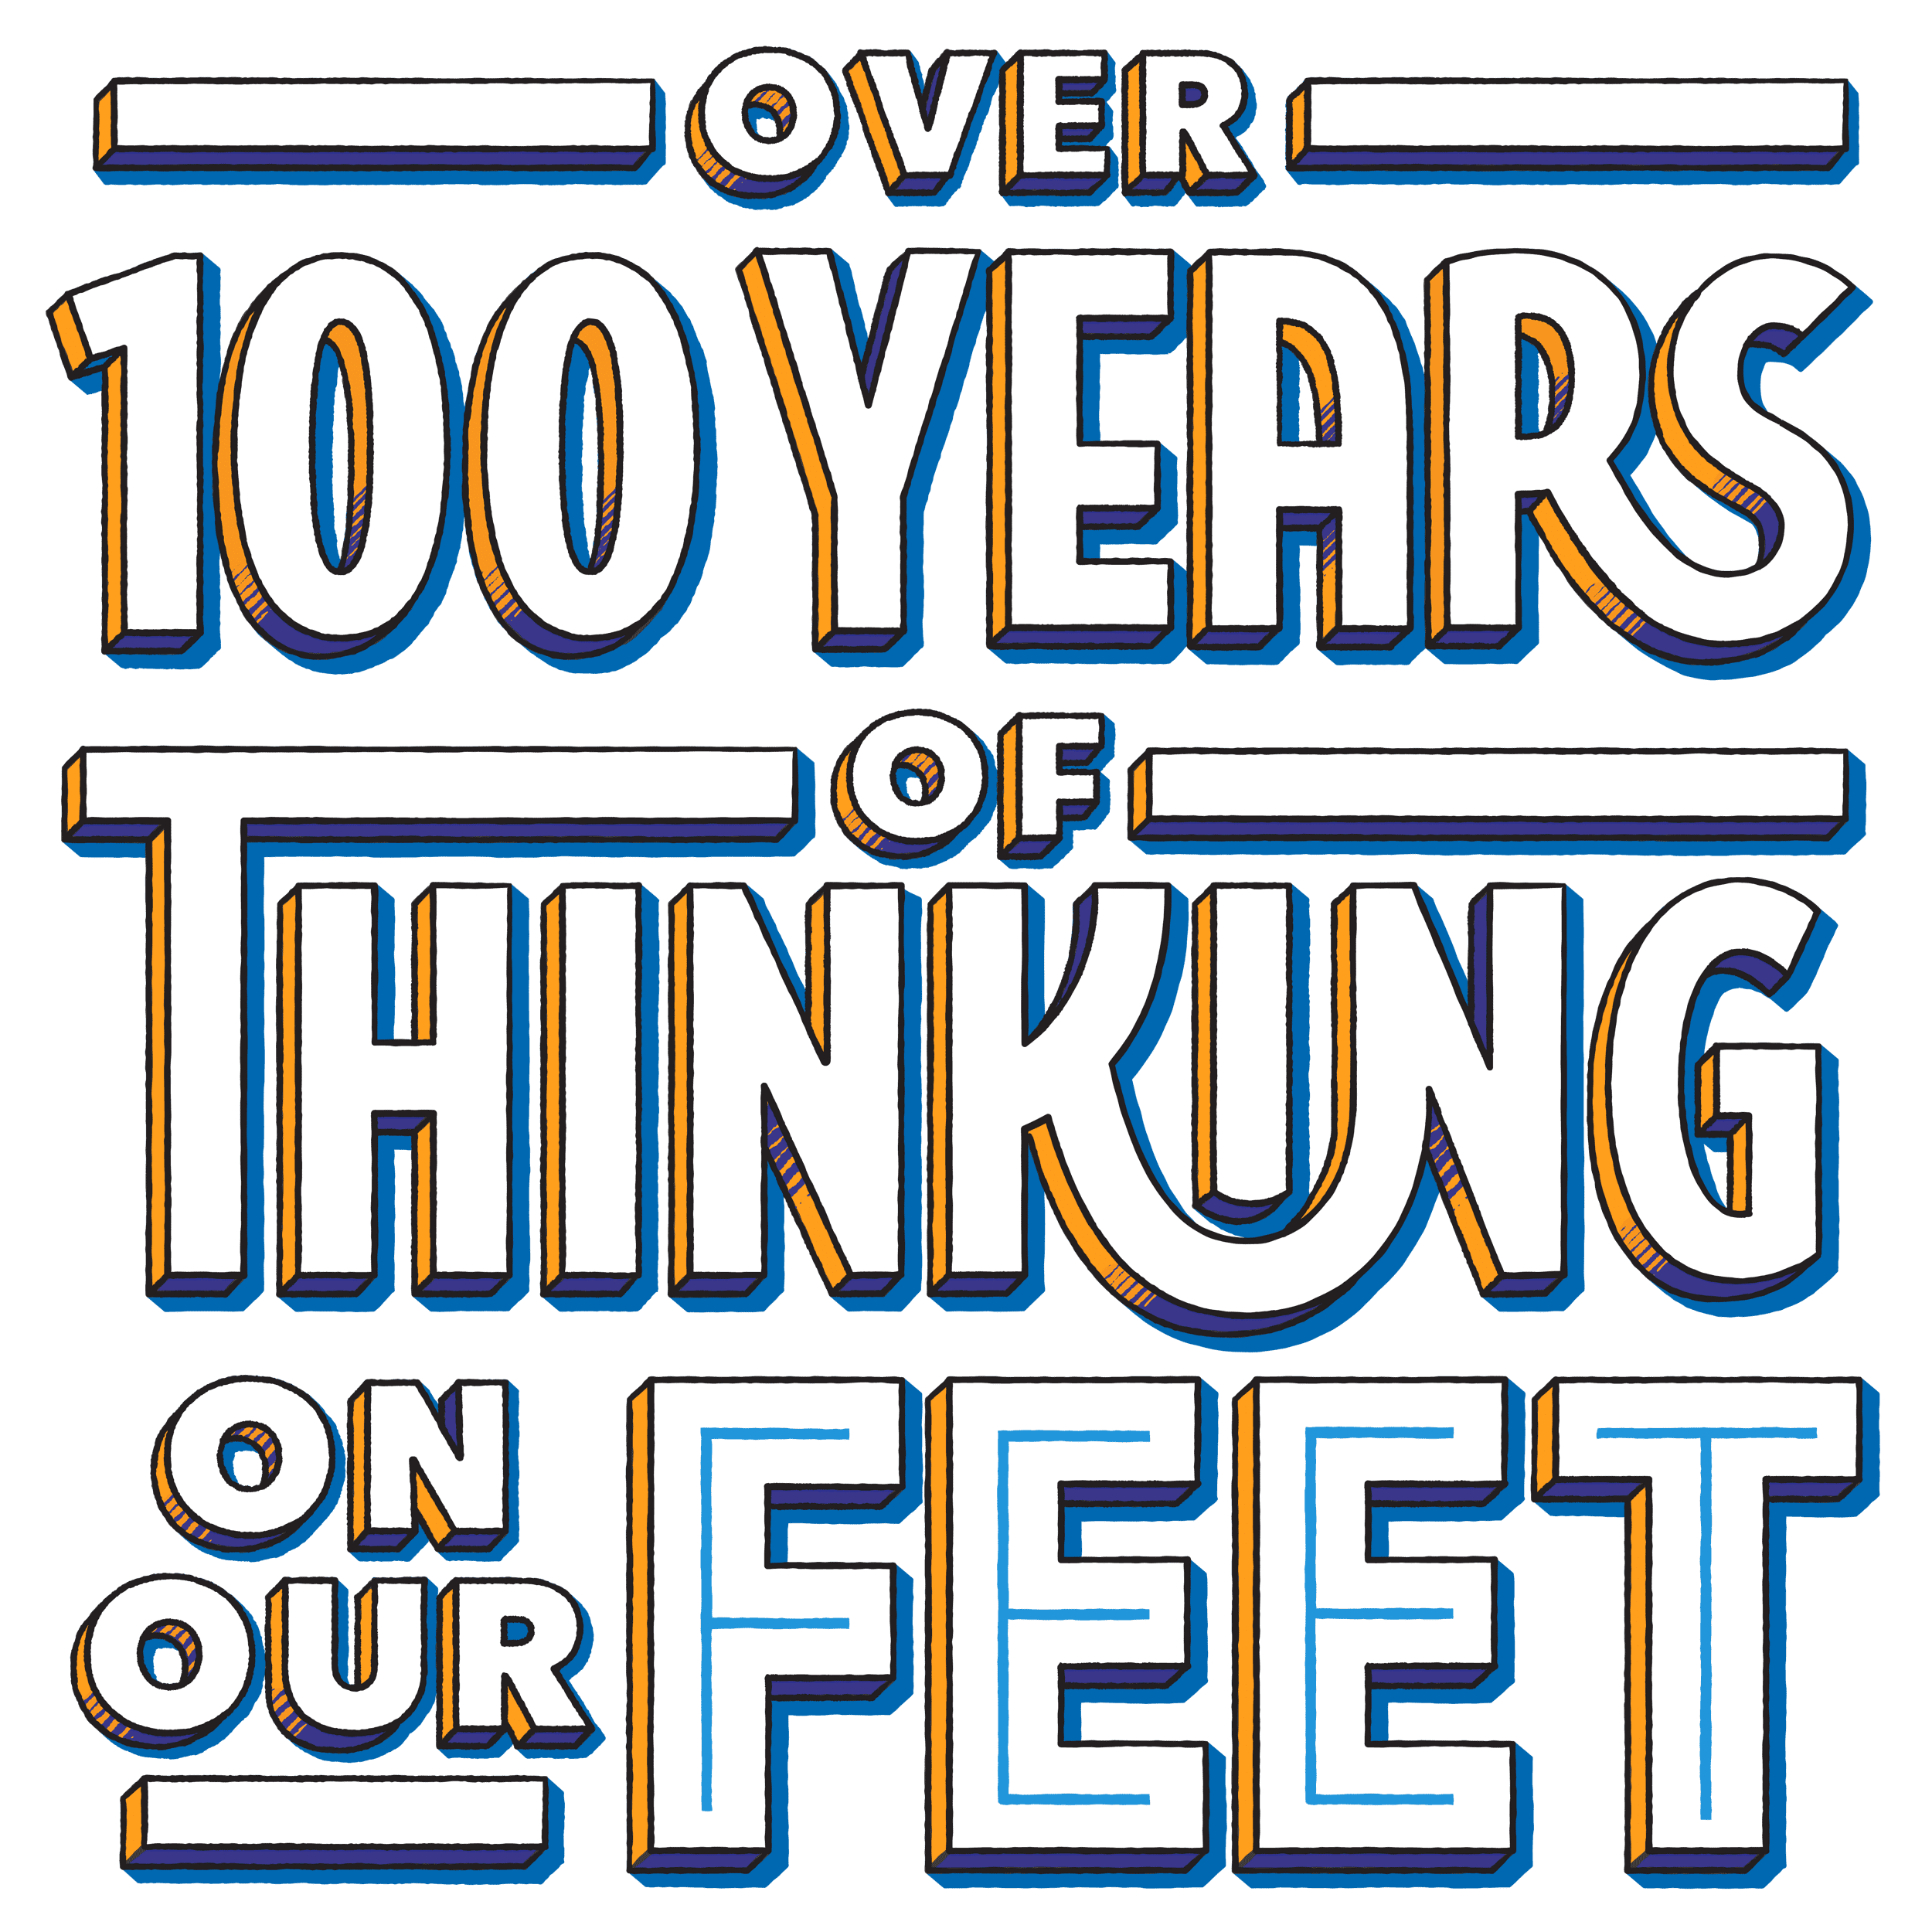 Over one-hundred years of thinking on our feet.